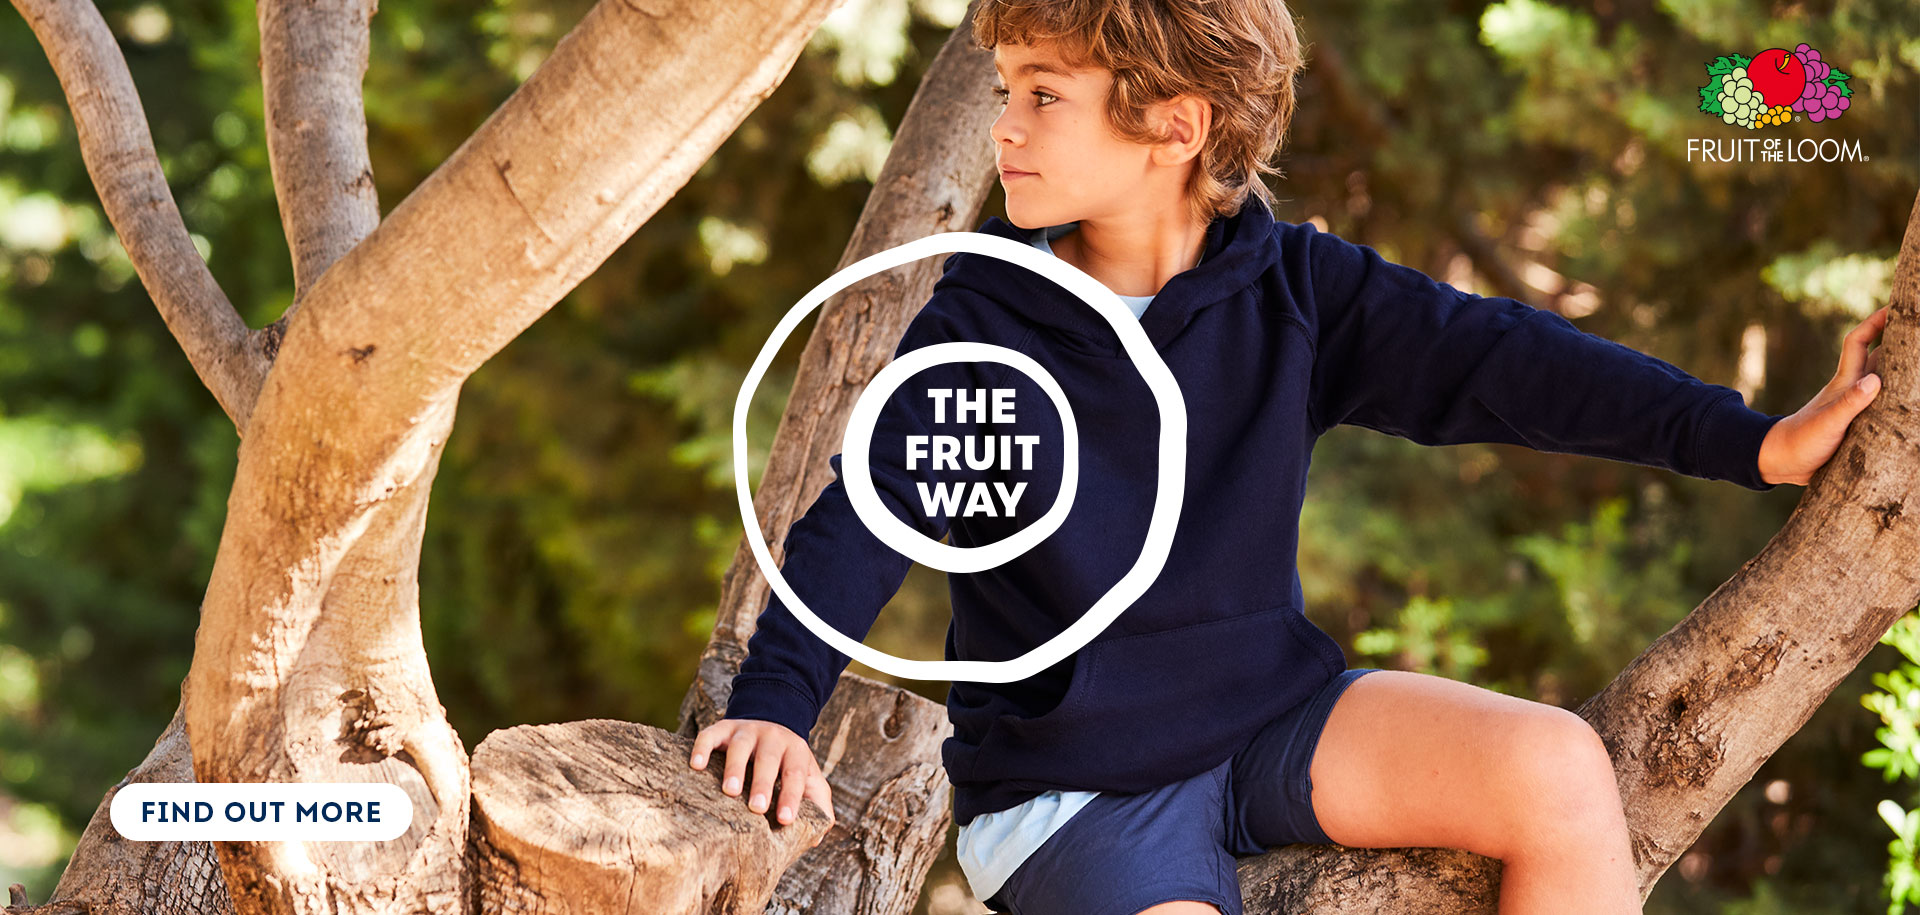 Fruit of the Loom Europe - IMPRINT DONE RIGHT